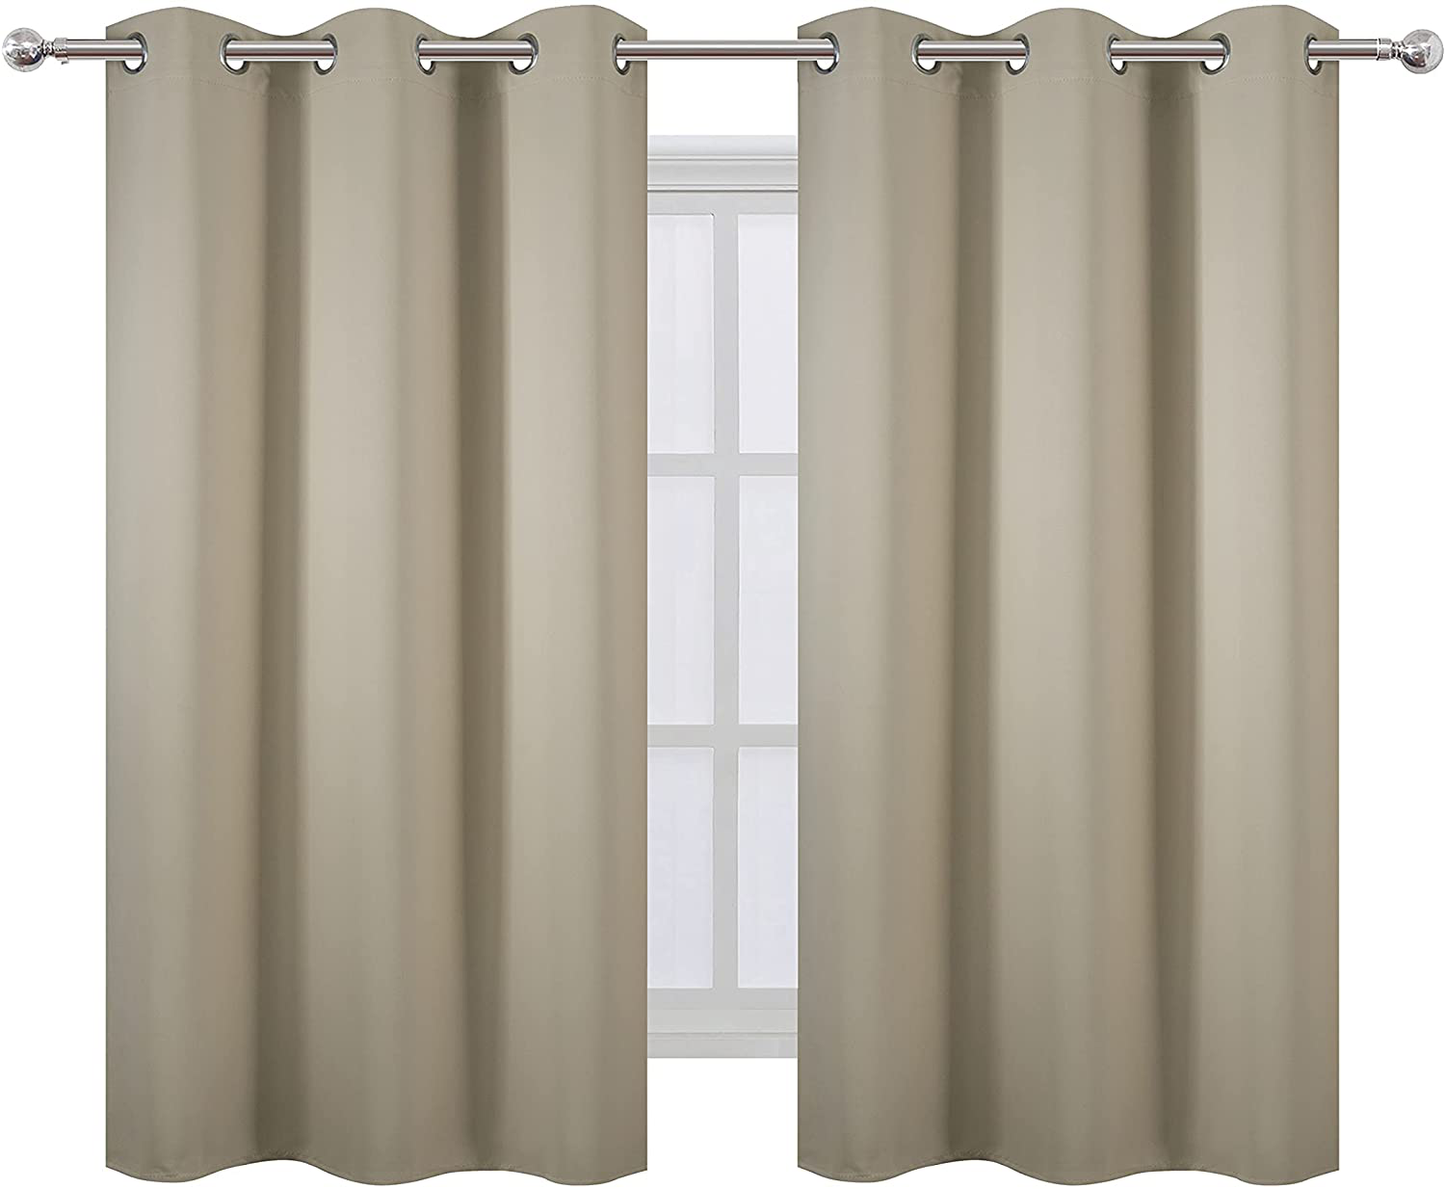 LEMOMO Pink Thermal Blackout Curtains/52 x 108 Inch/Set of 2 Panels Room Darkening Curtains for Bedroom